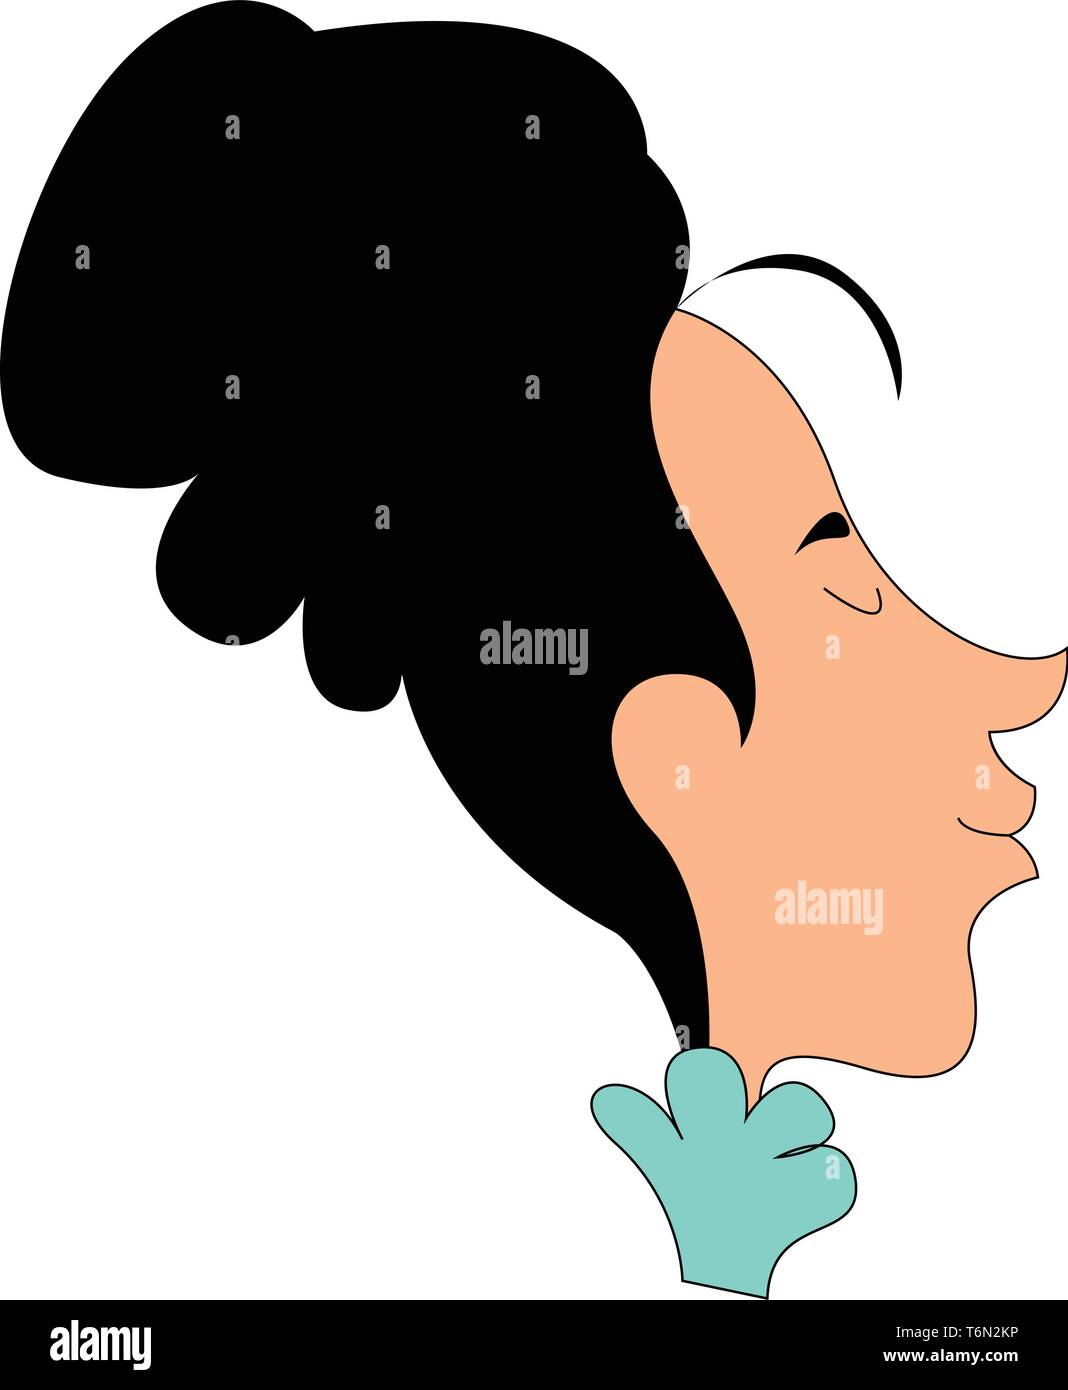 Clipart of a woman dressed in blue with eyes closed has an elongated face and her hair swept up and secured at the back of the head  vector  color dra Stock Vector